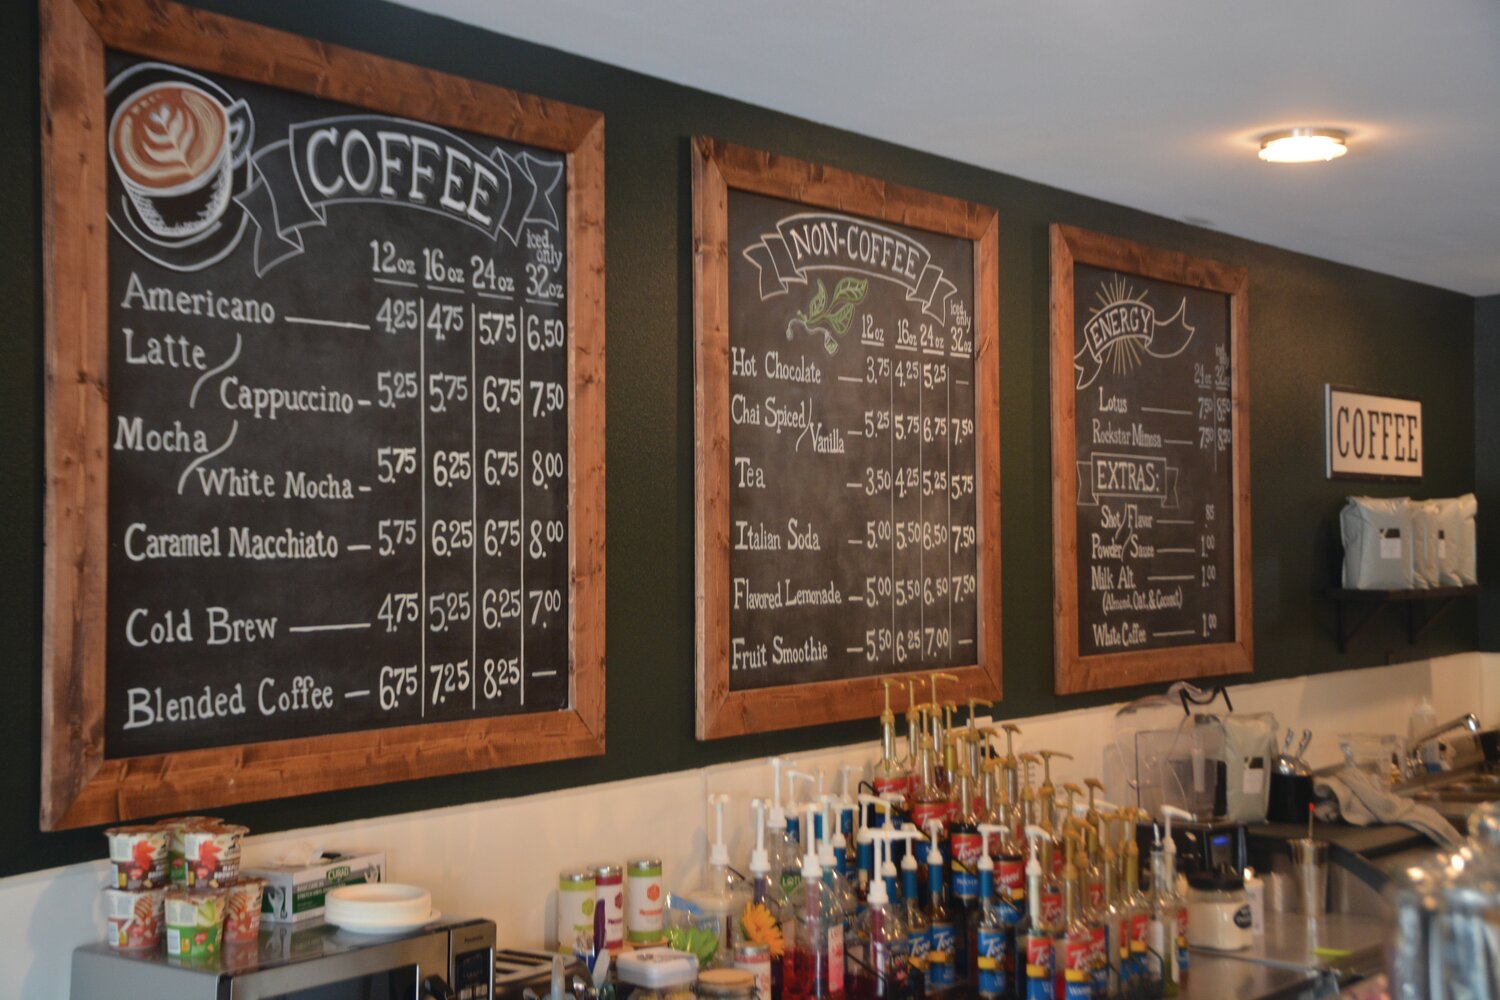 Worthy Coffee Co. has a wide variety of drink options on its menu.